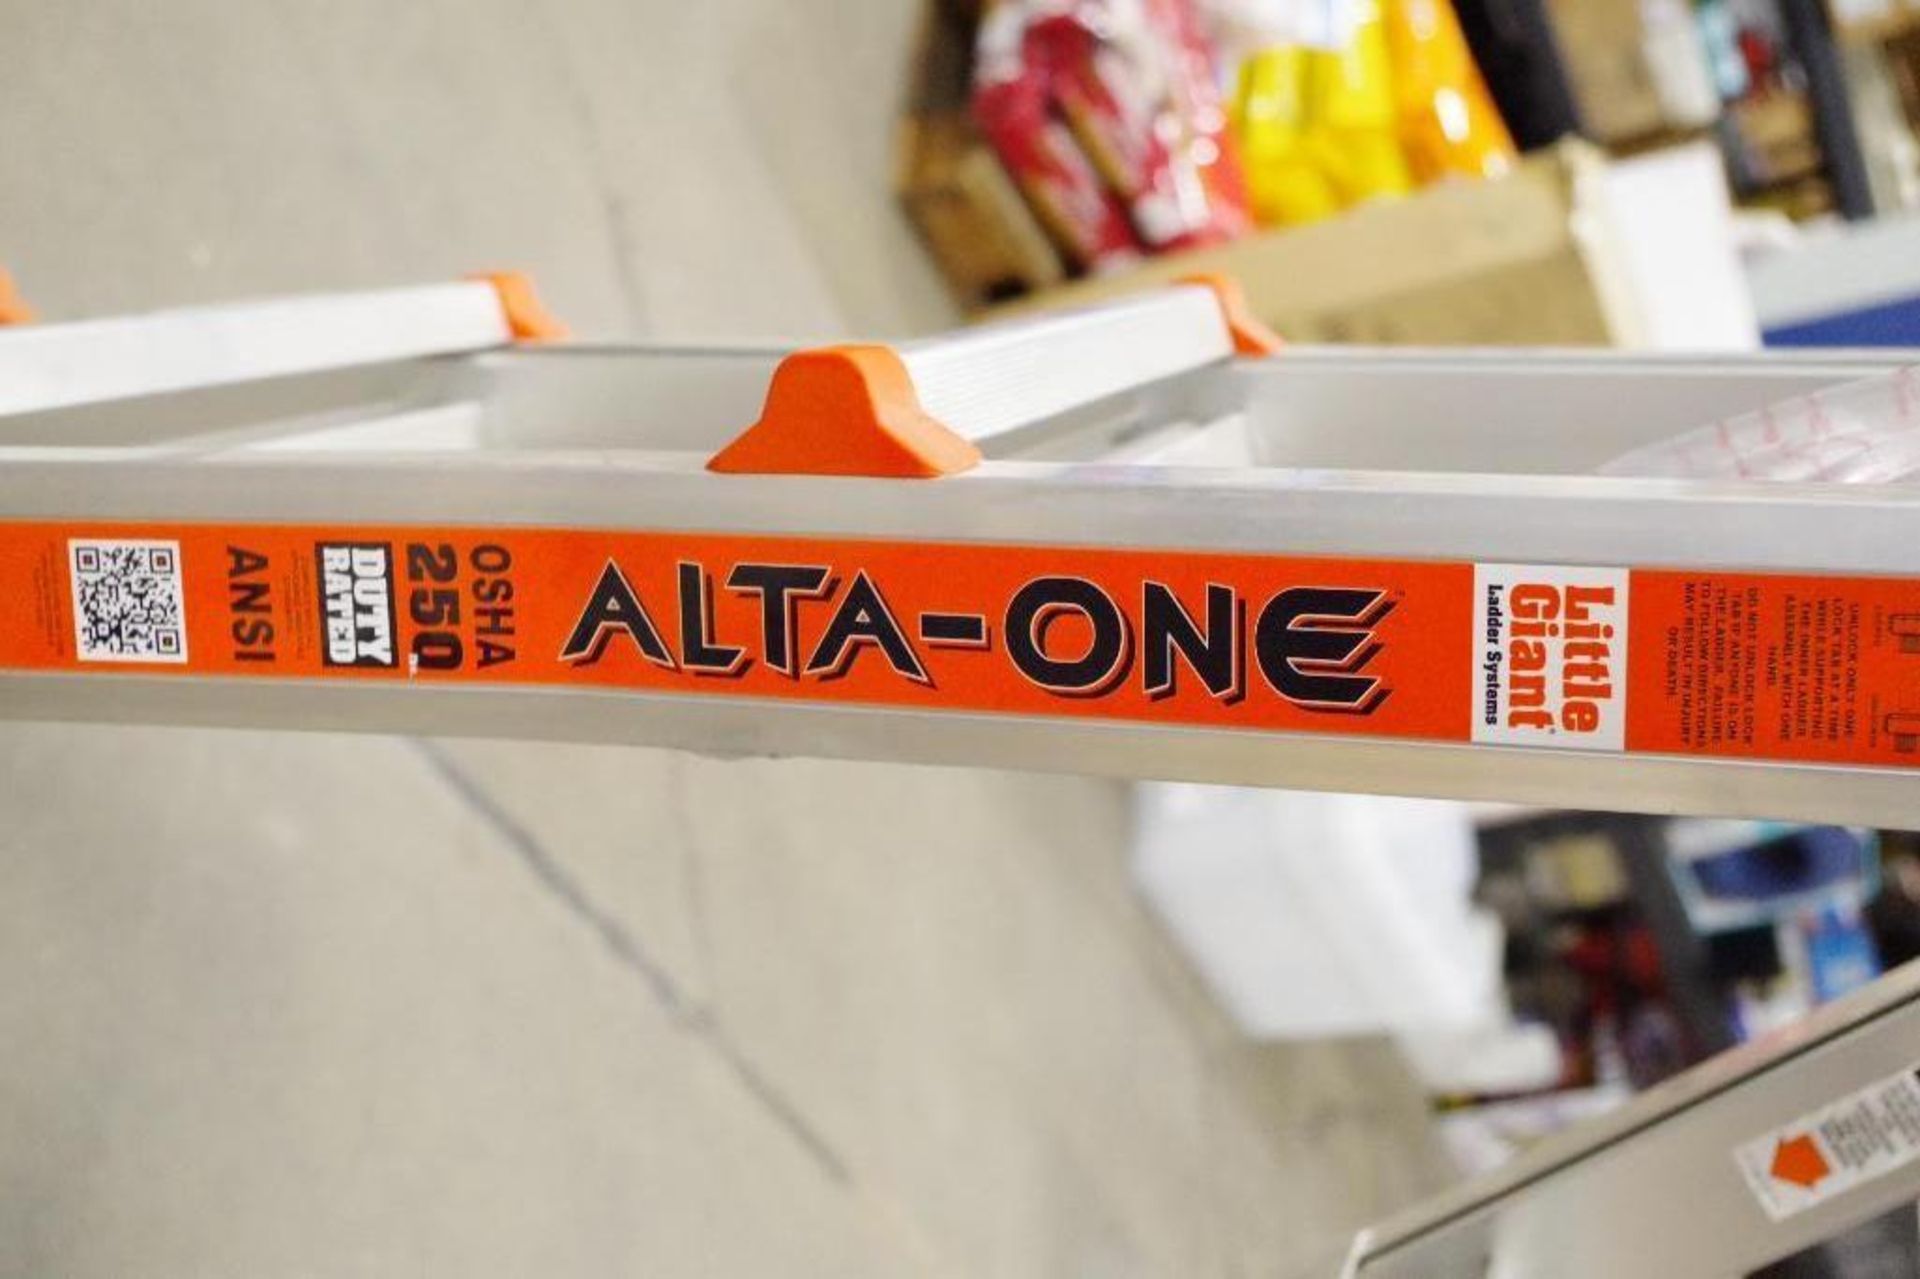 NEW LITTLE GIANT Alta-One Heavy Duty Rating Step Ladder - Image 2 of 5